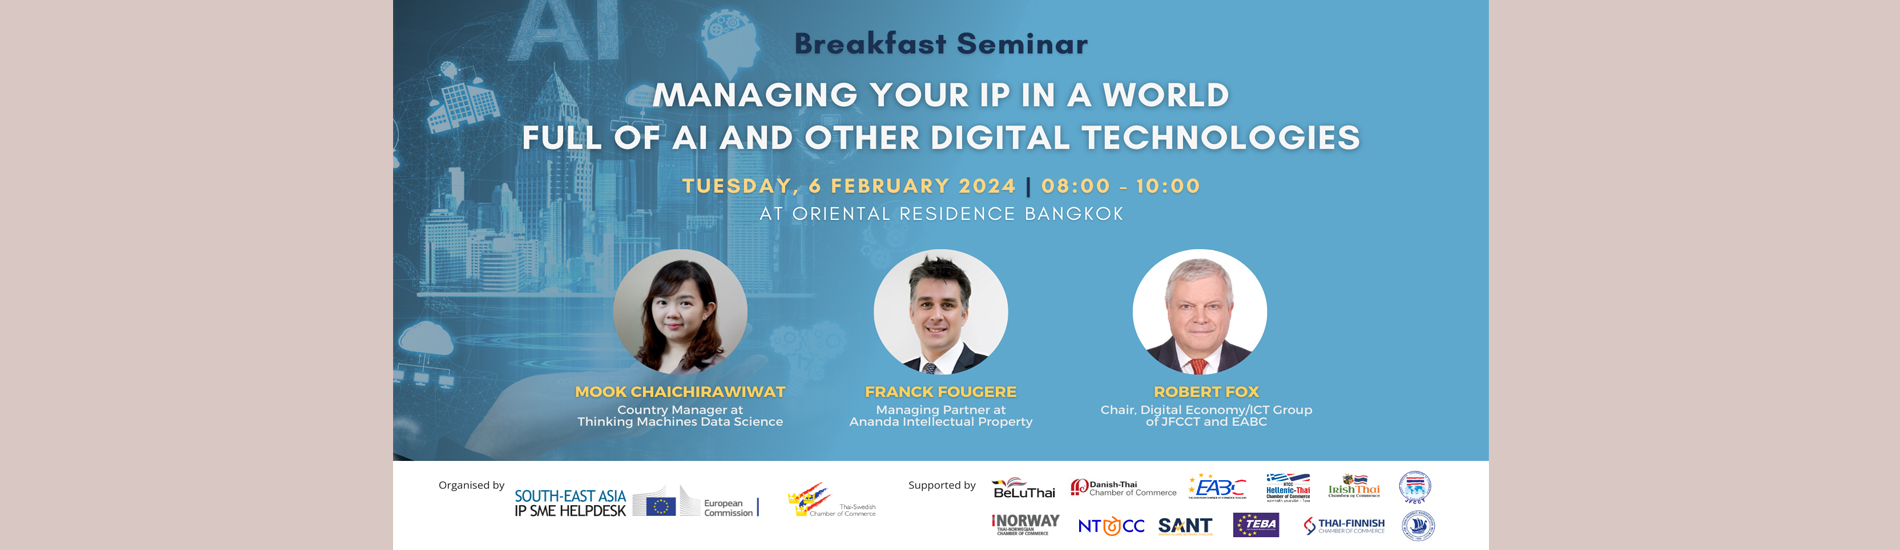 Breakfast Seminar: Managing your IP in a World Full of AI Event